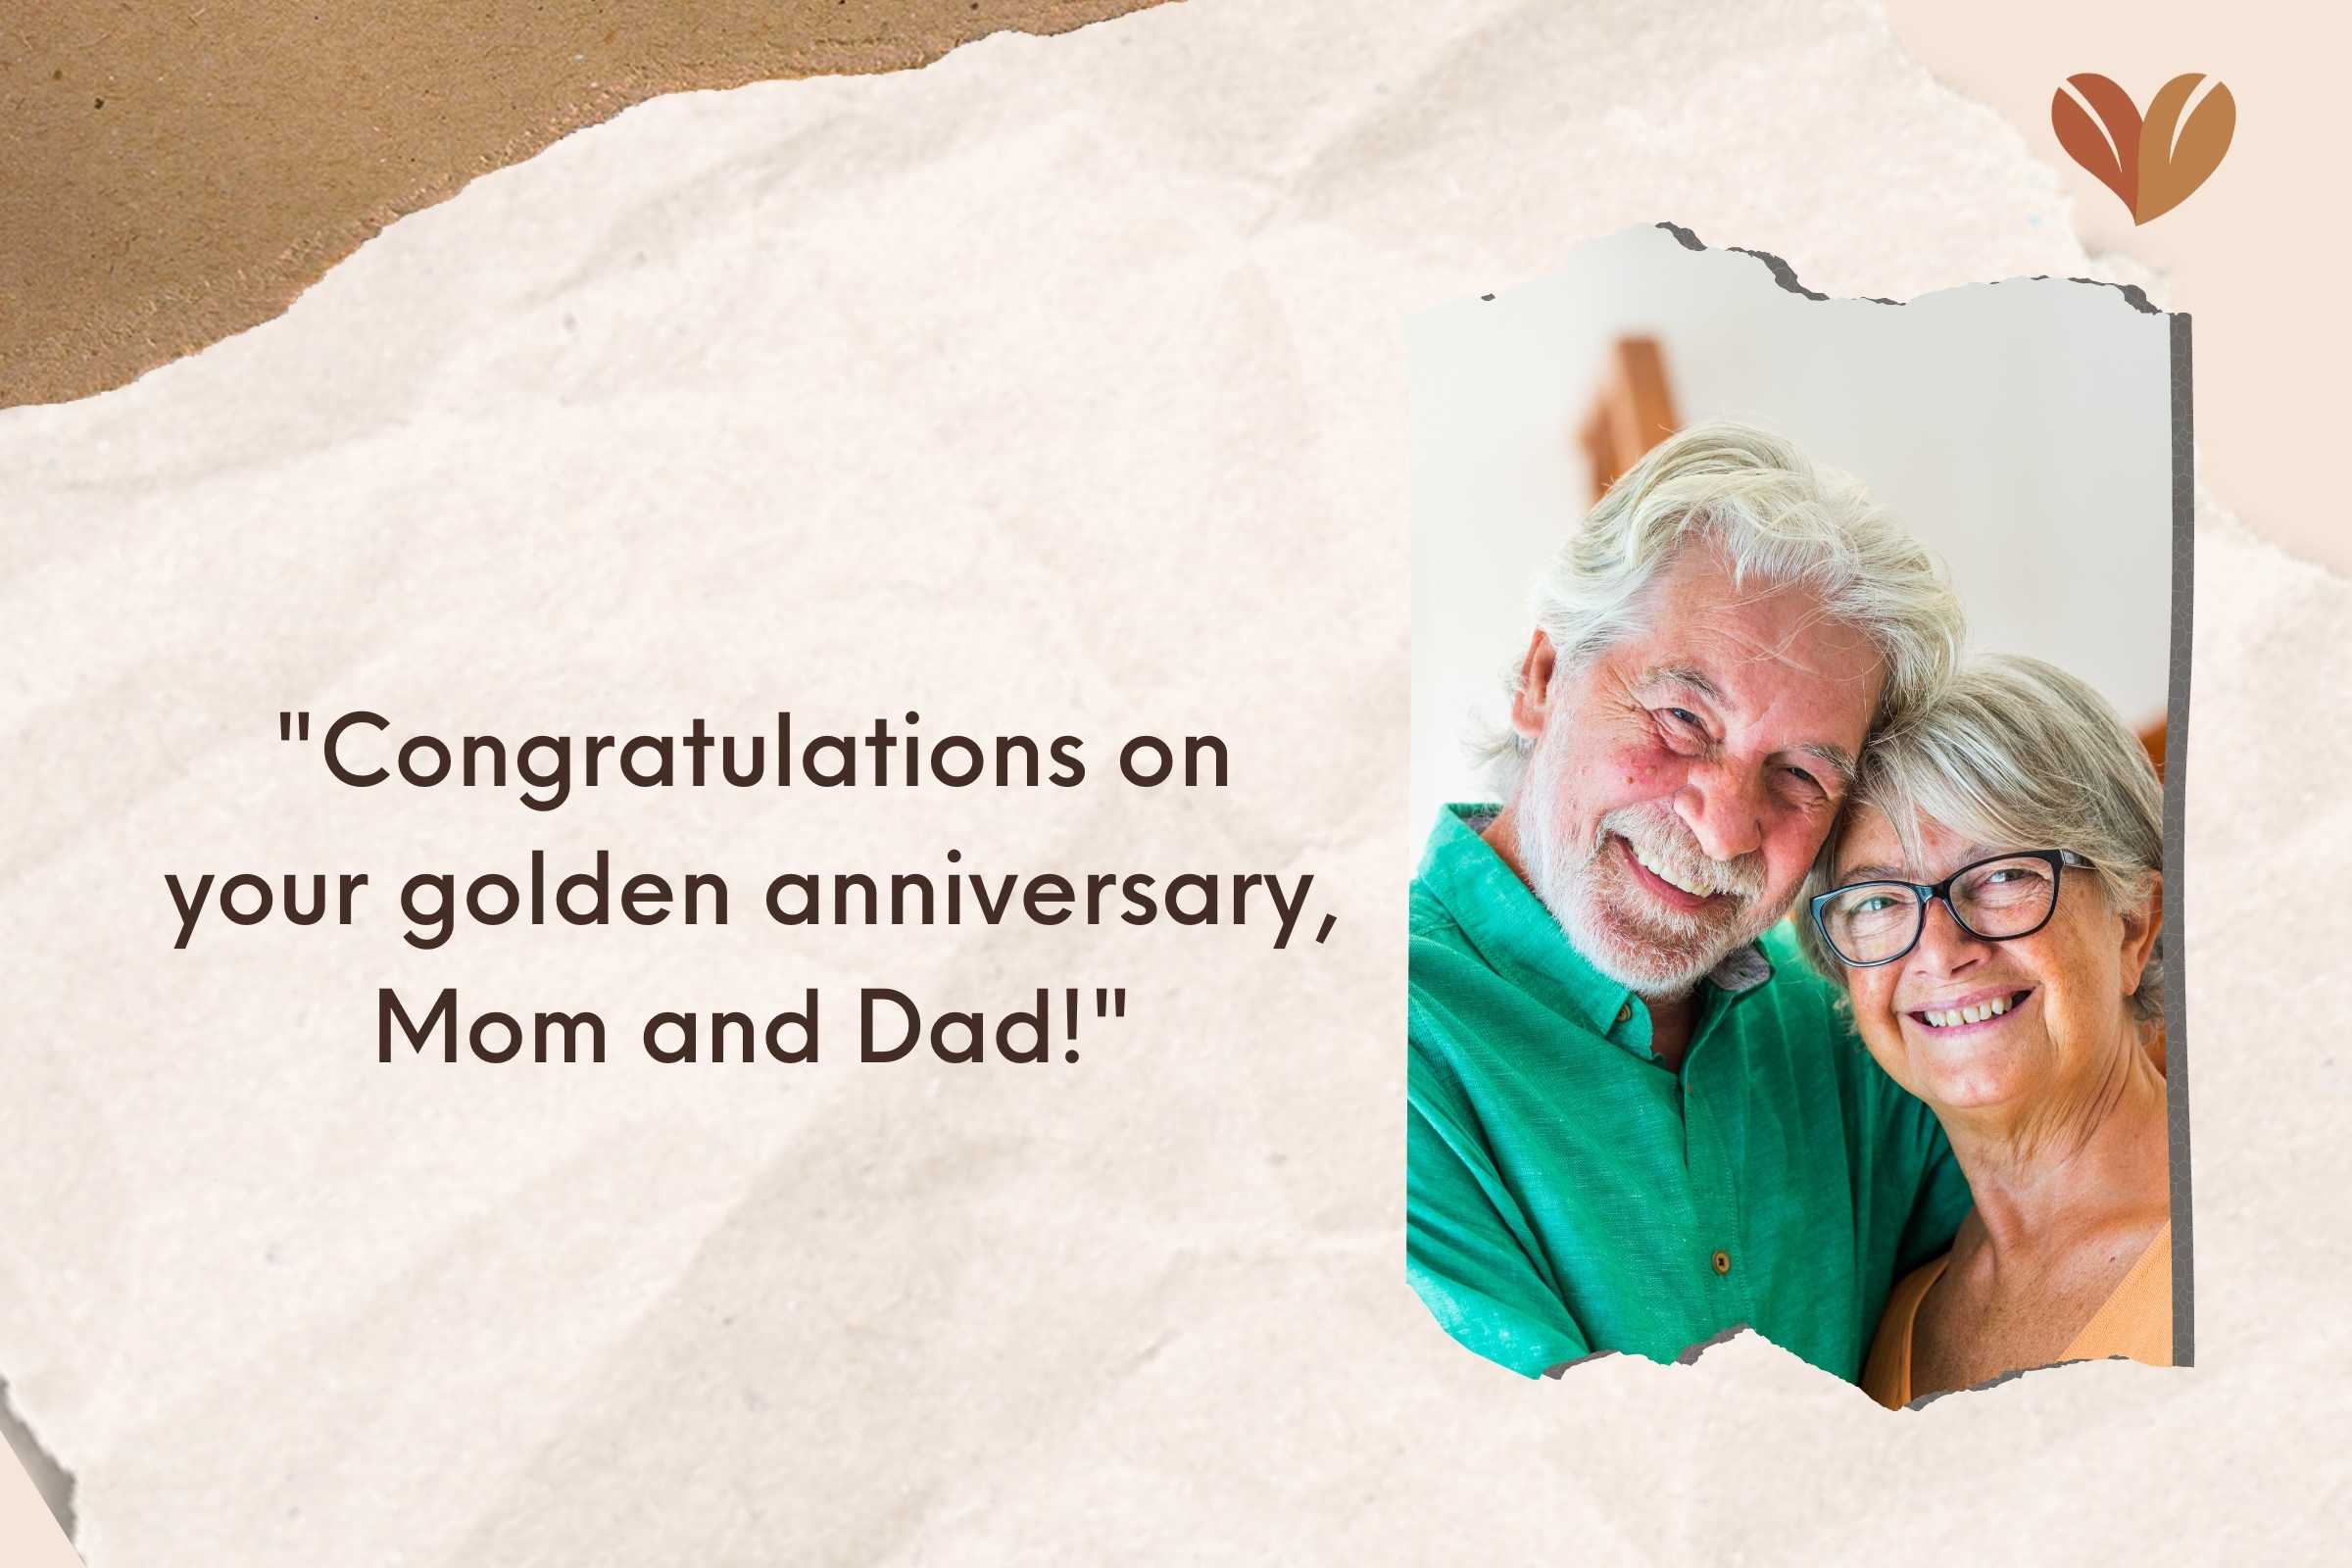 Celebrating love and commitment with touching anniversary quotes for parents.